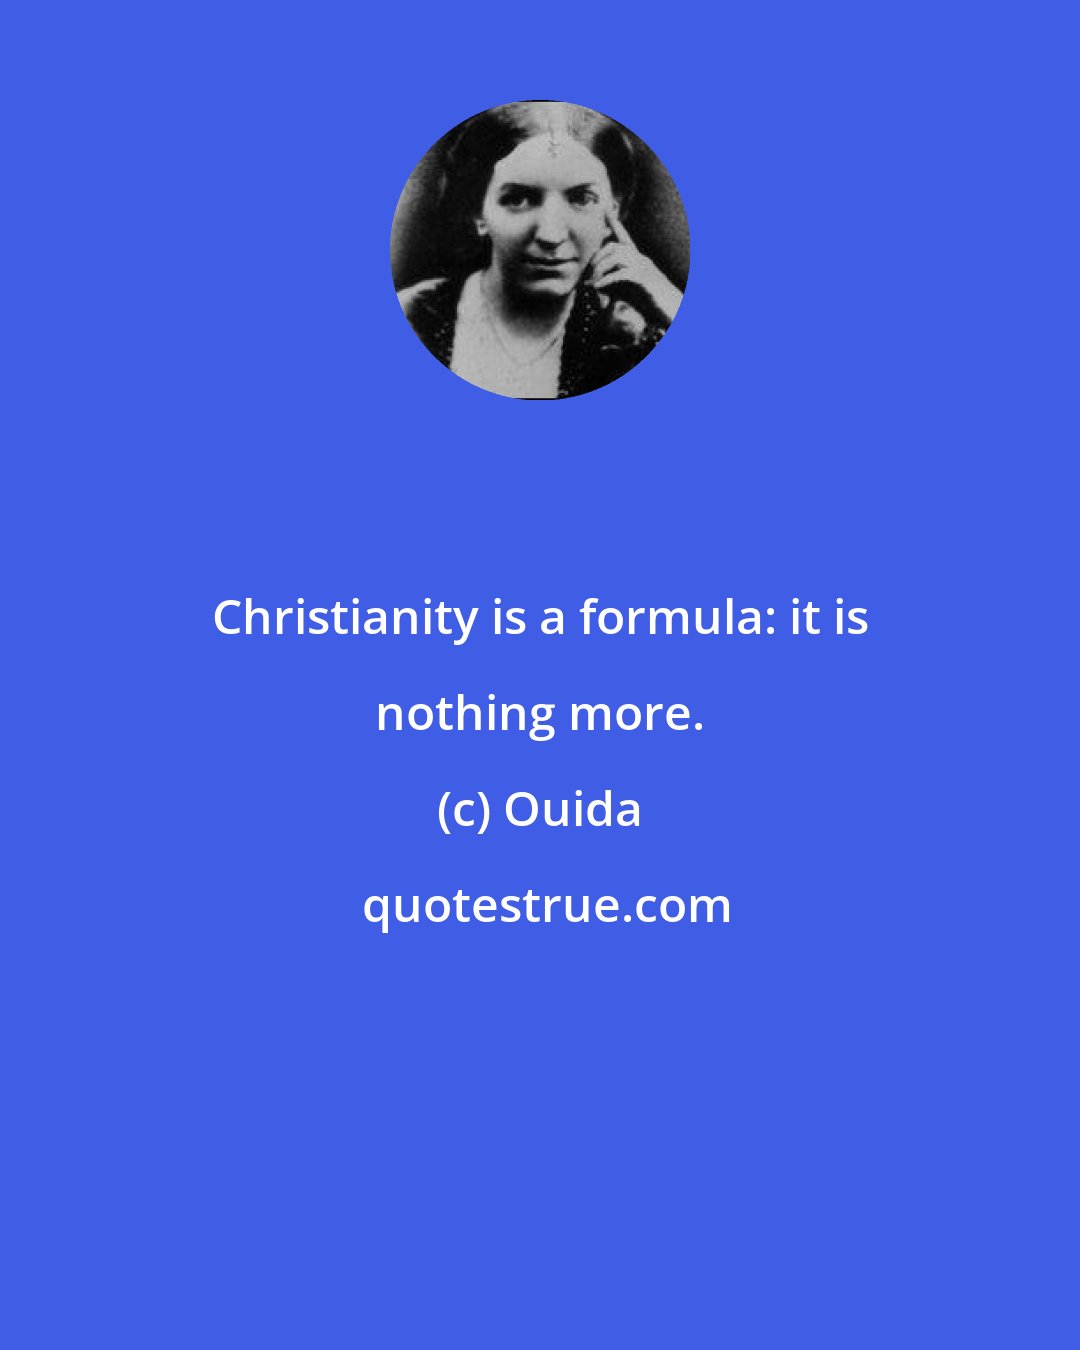 Ouida: Christianity is a formula: it is nothing more.